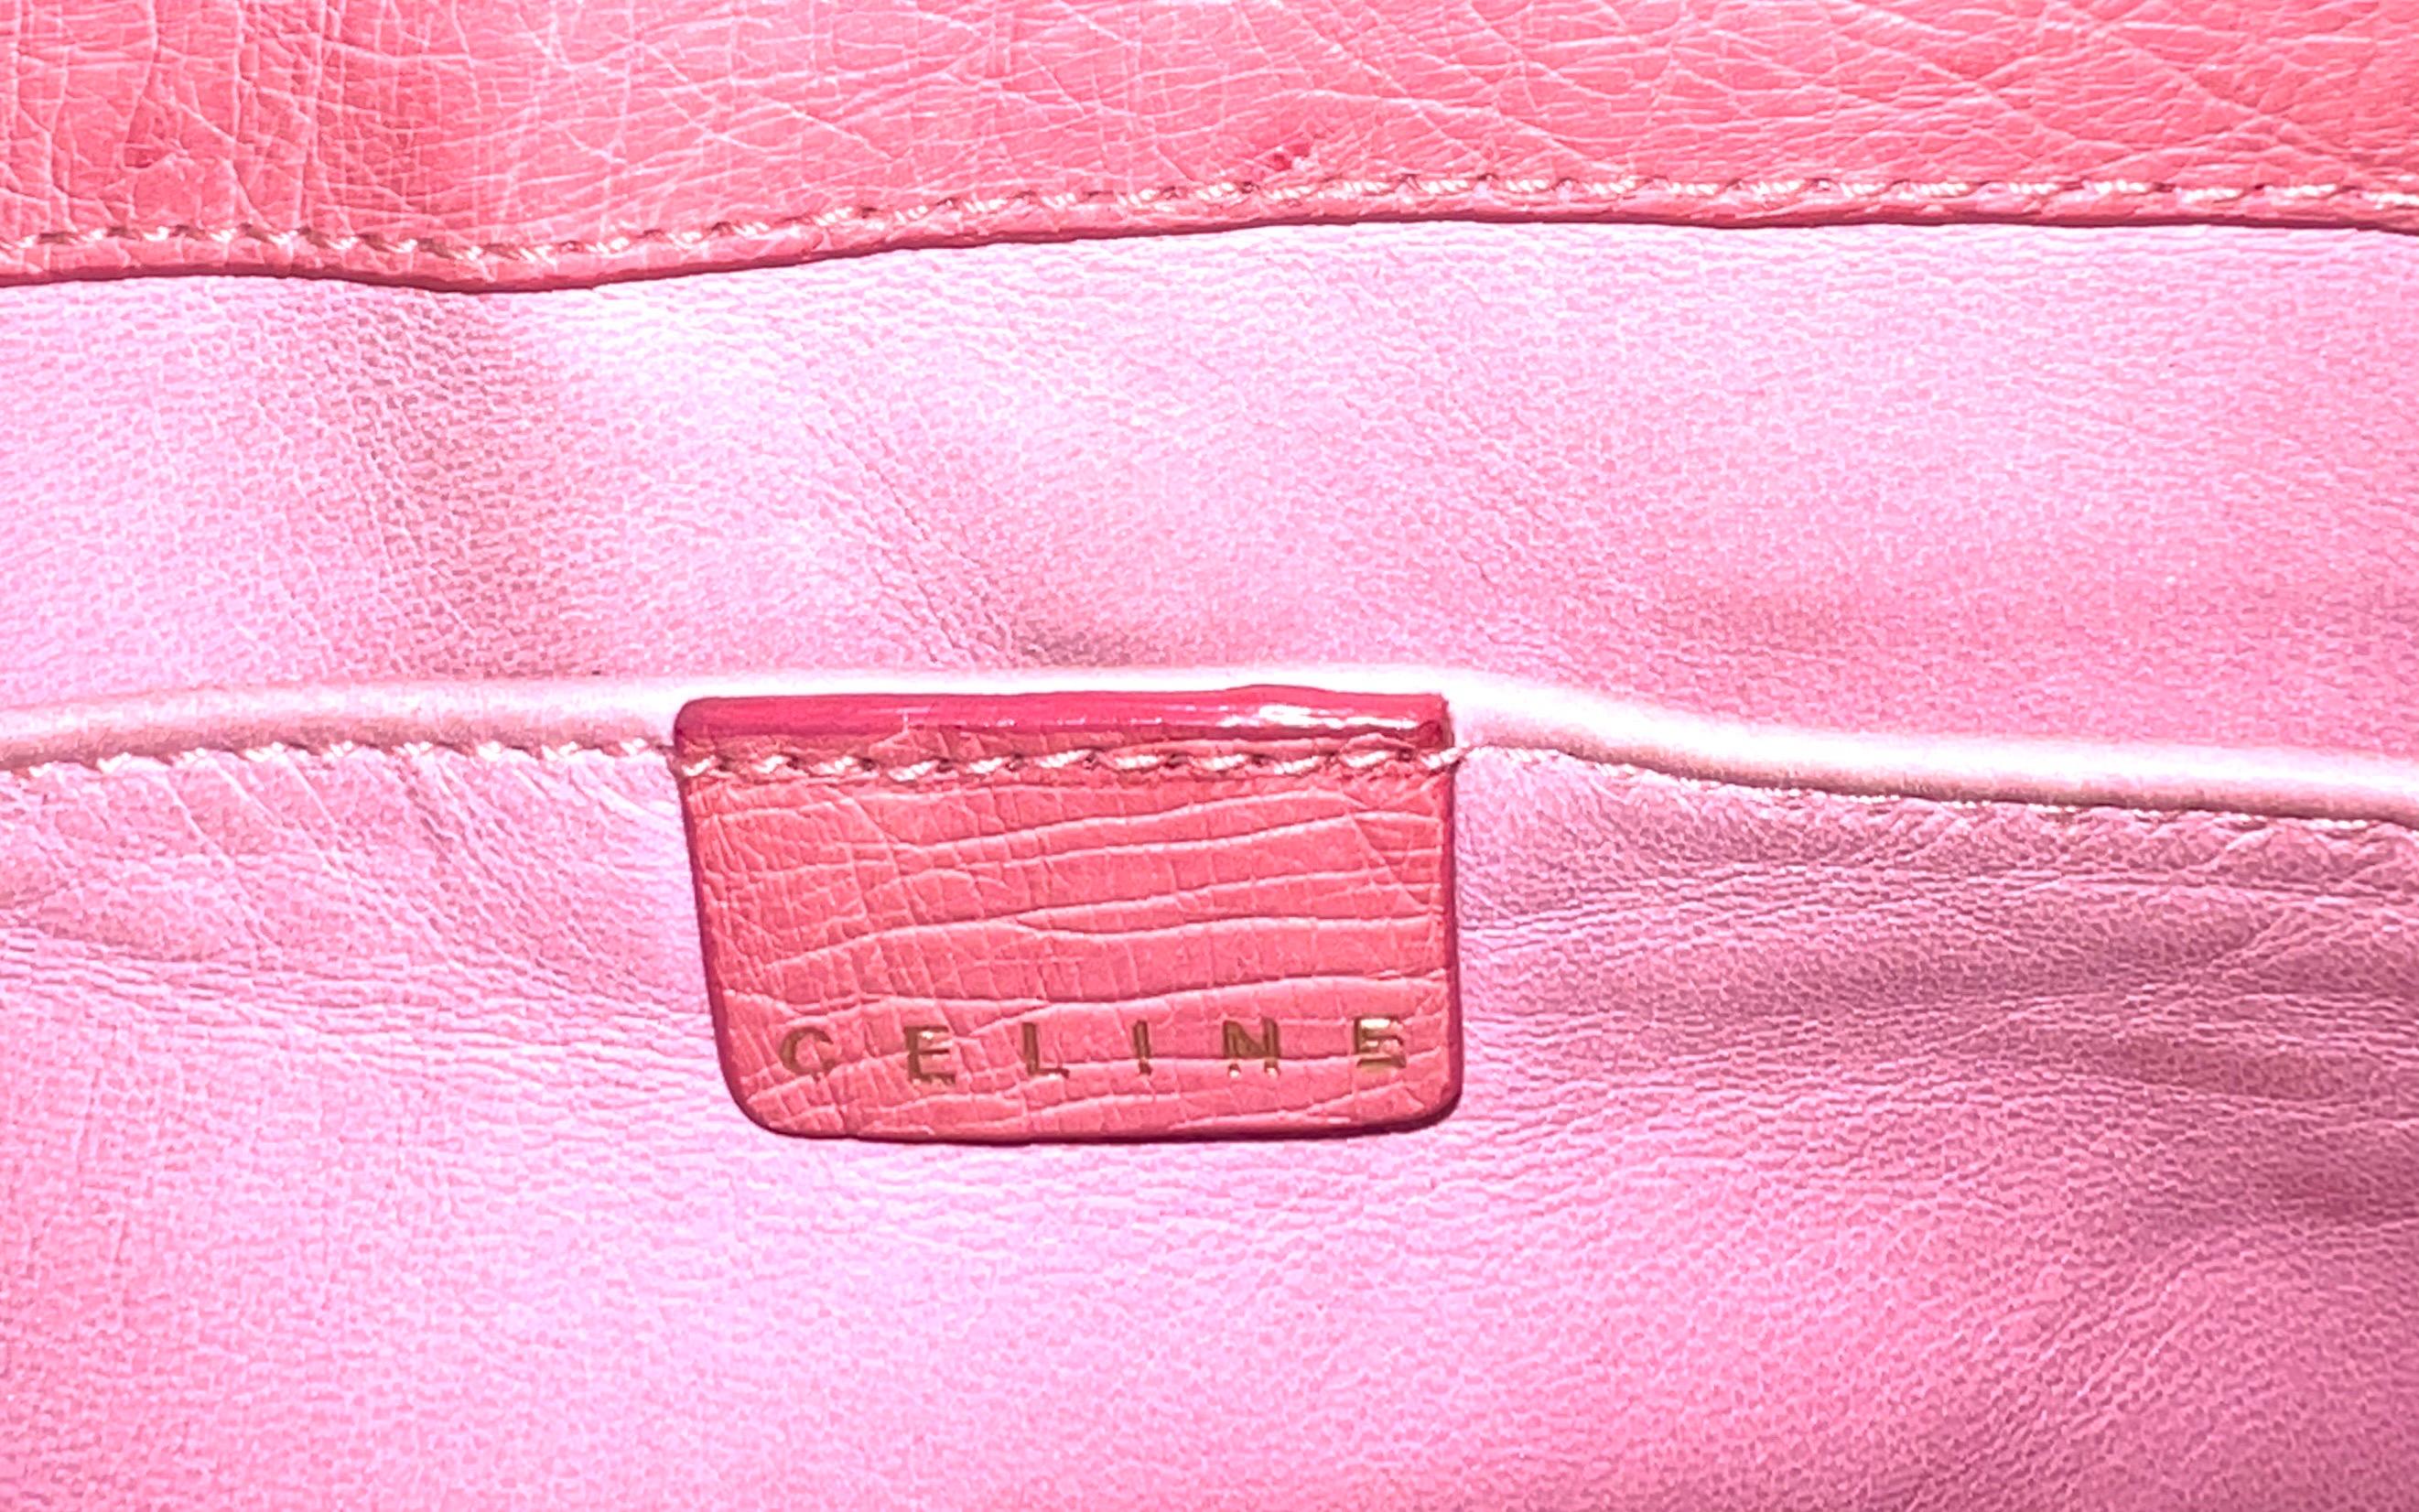 CELINE Rare Exotic Pink „Barbie“ Ostrich Skin Boogie Bag by Michael Kors 2000s For Sale 10